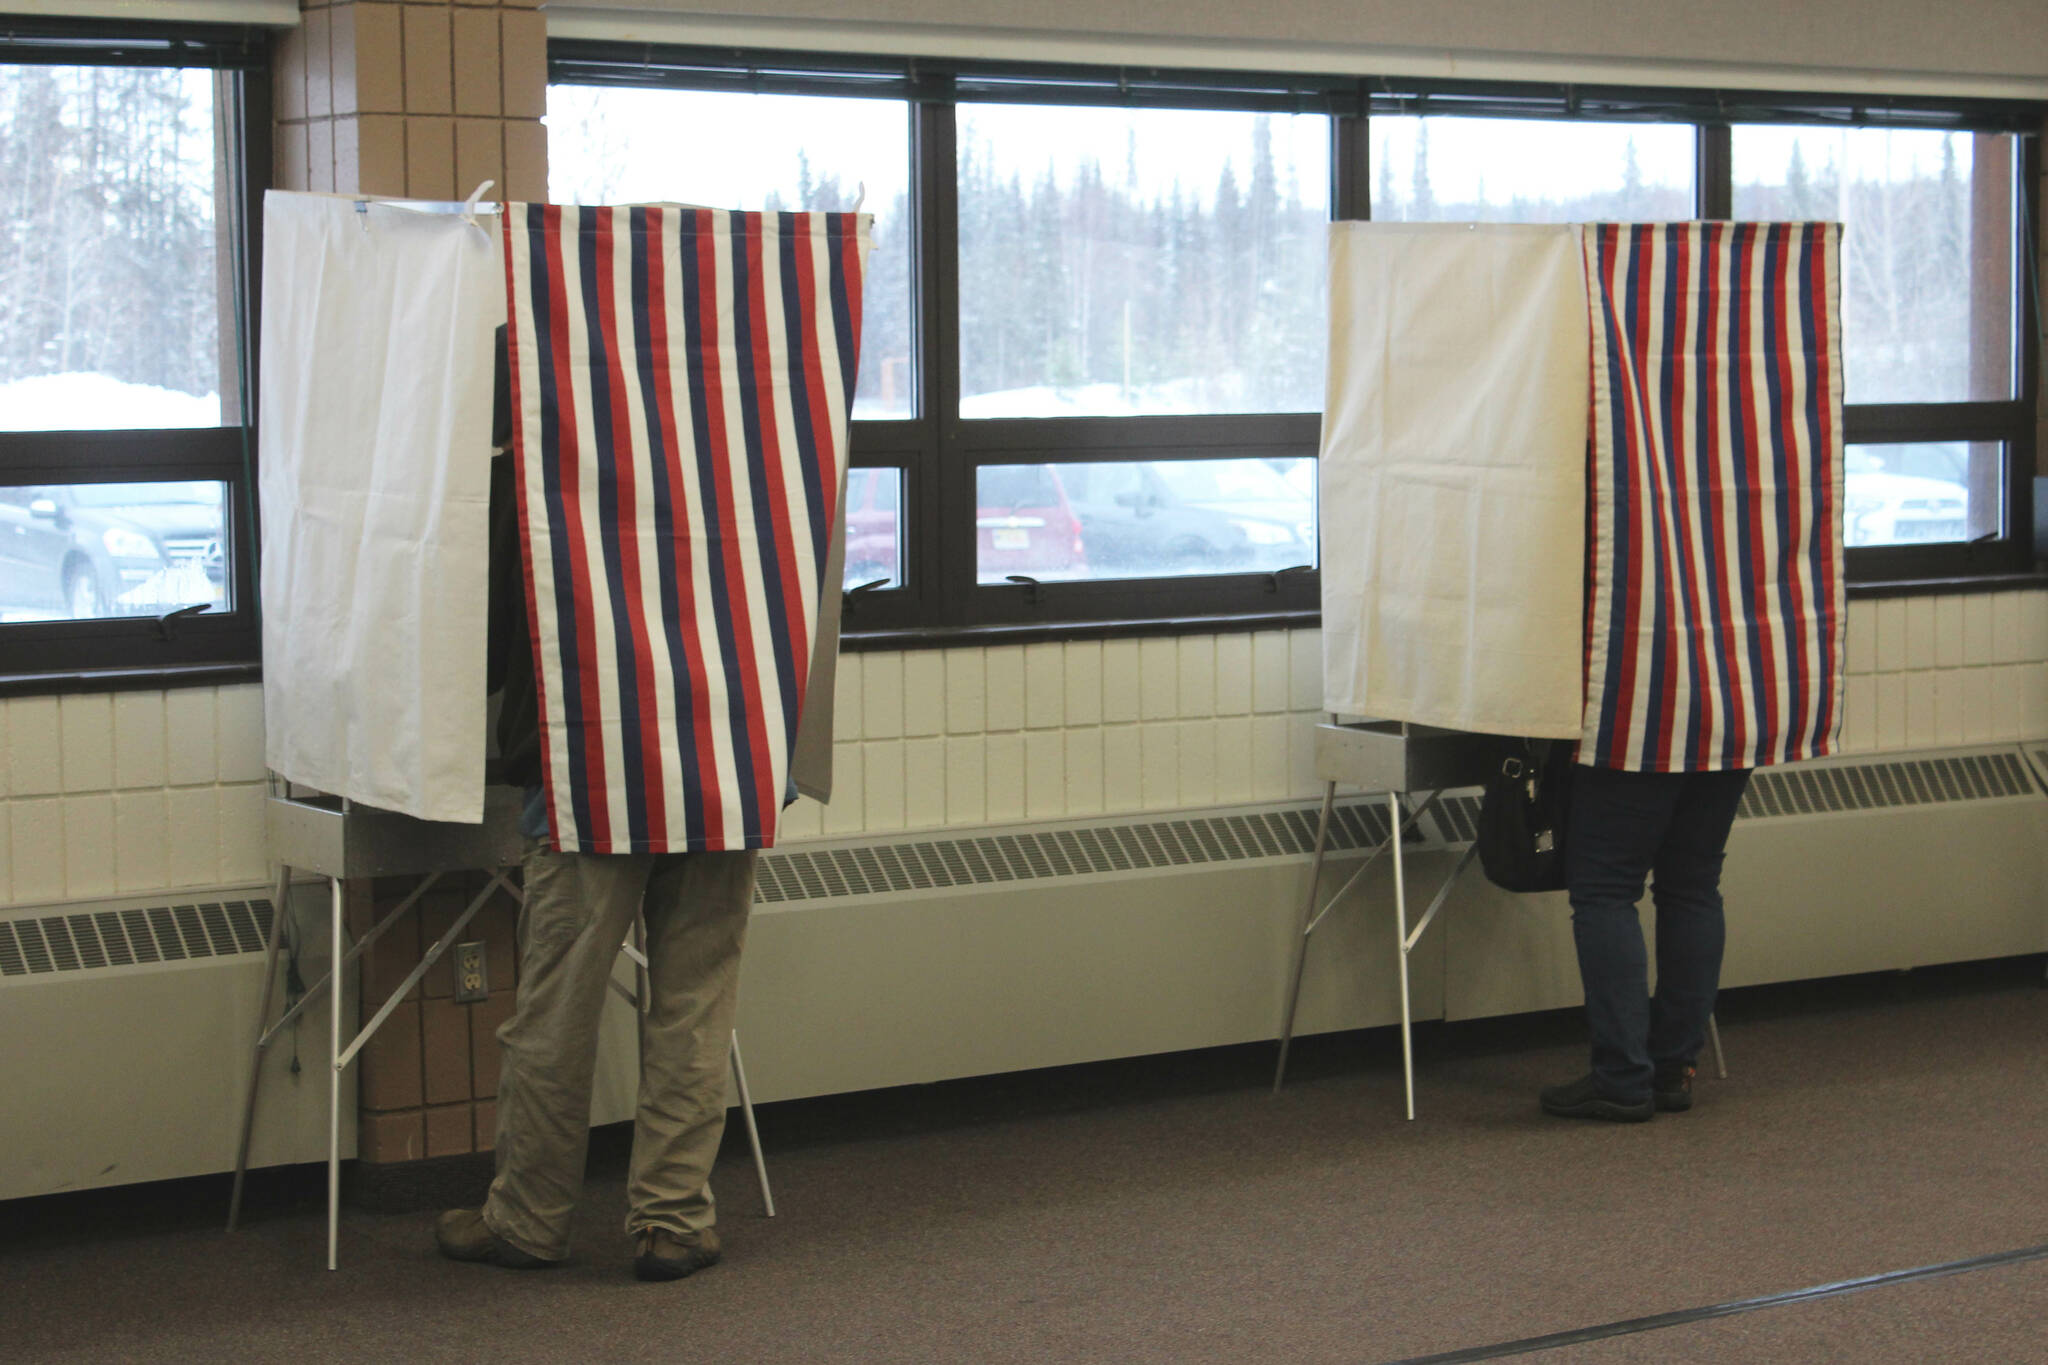 People vote in polling booths at the Soldotna Regional Sports Complex on Tuesday, Nov. 8, 2022 in Soldotna, Alaska. (Ashlyn O'Hara/Peninsula Clarion)